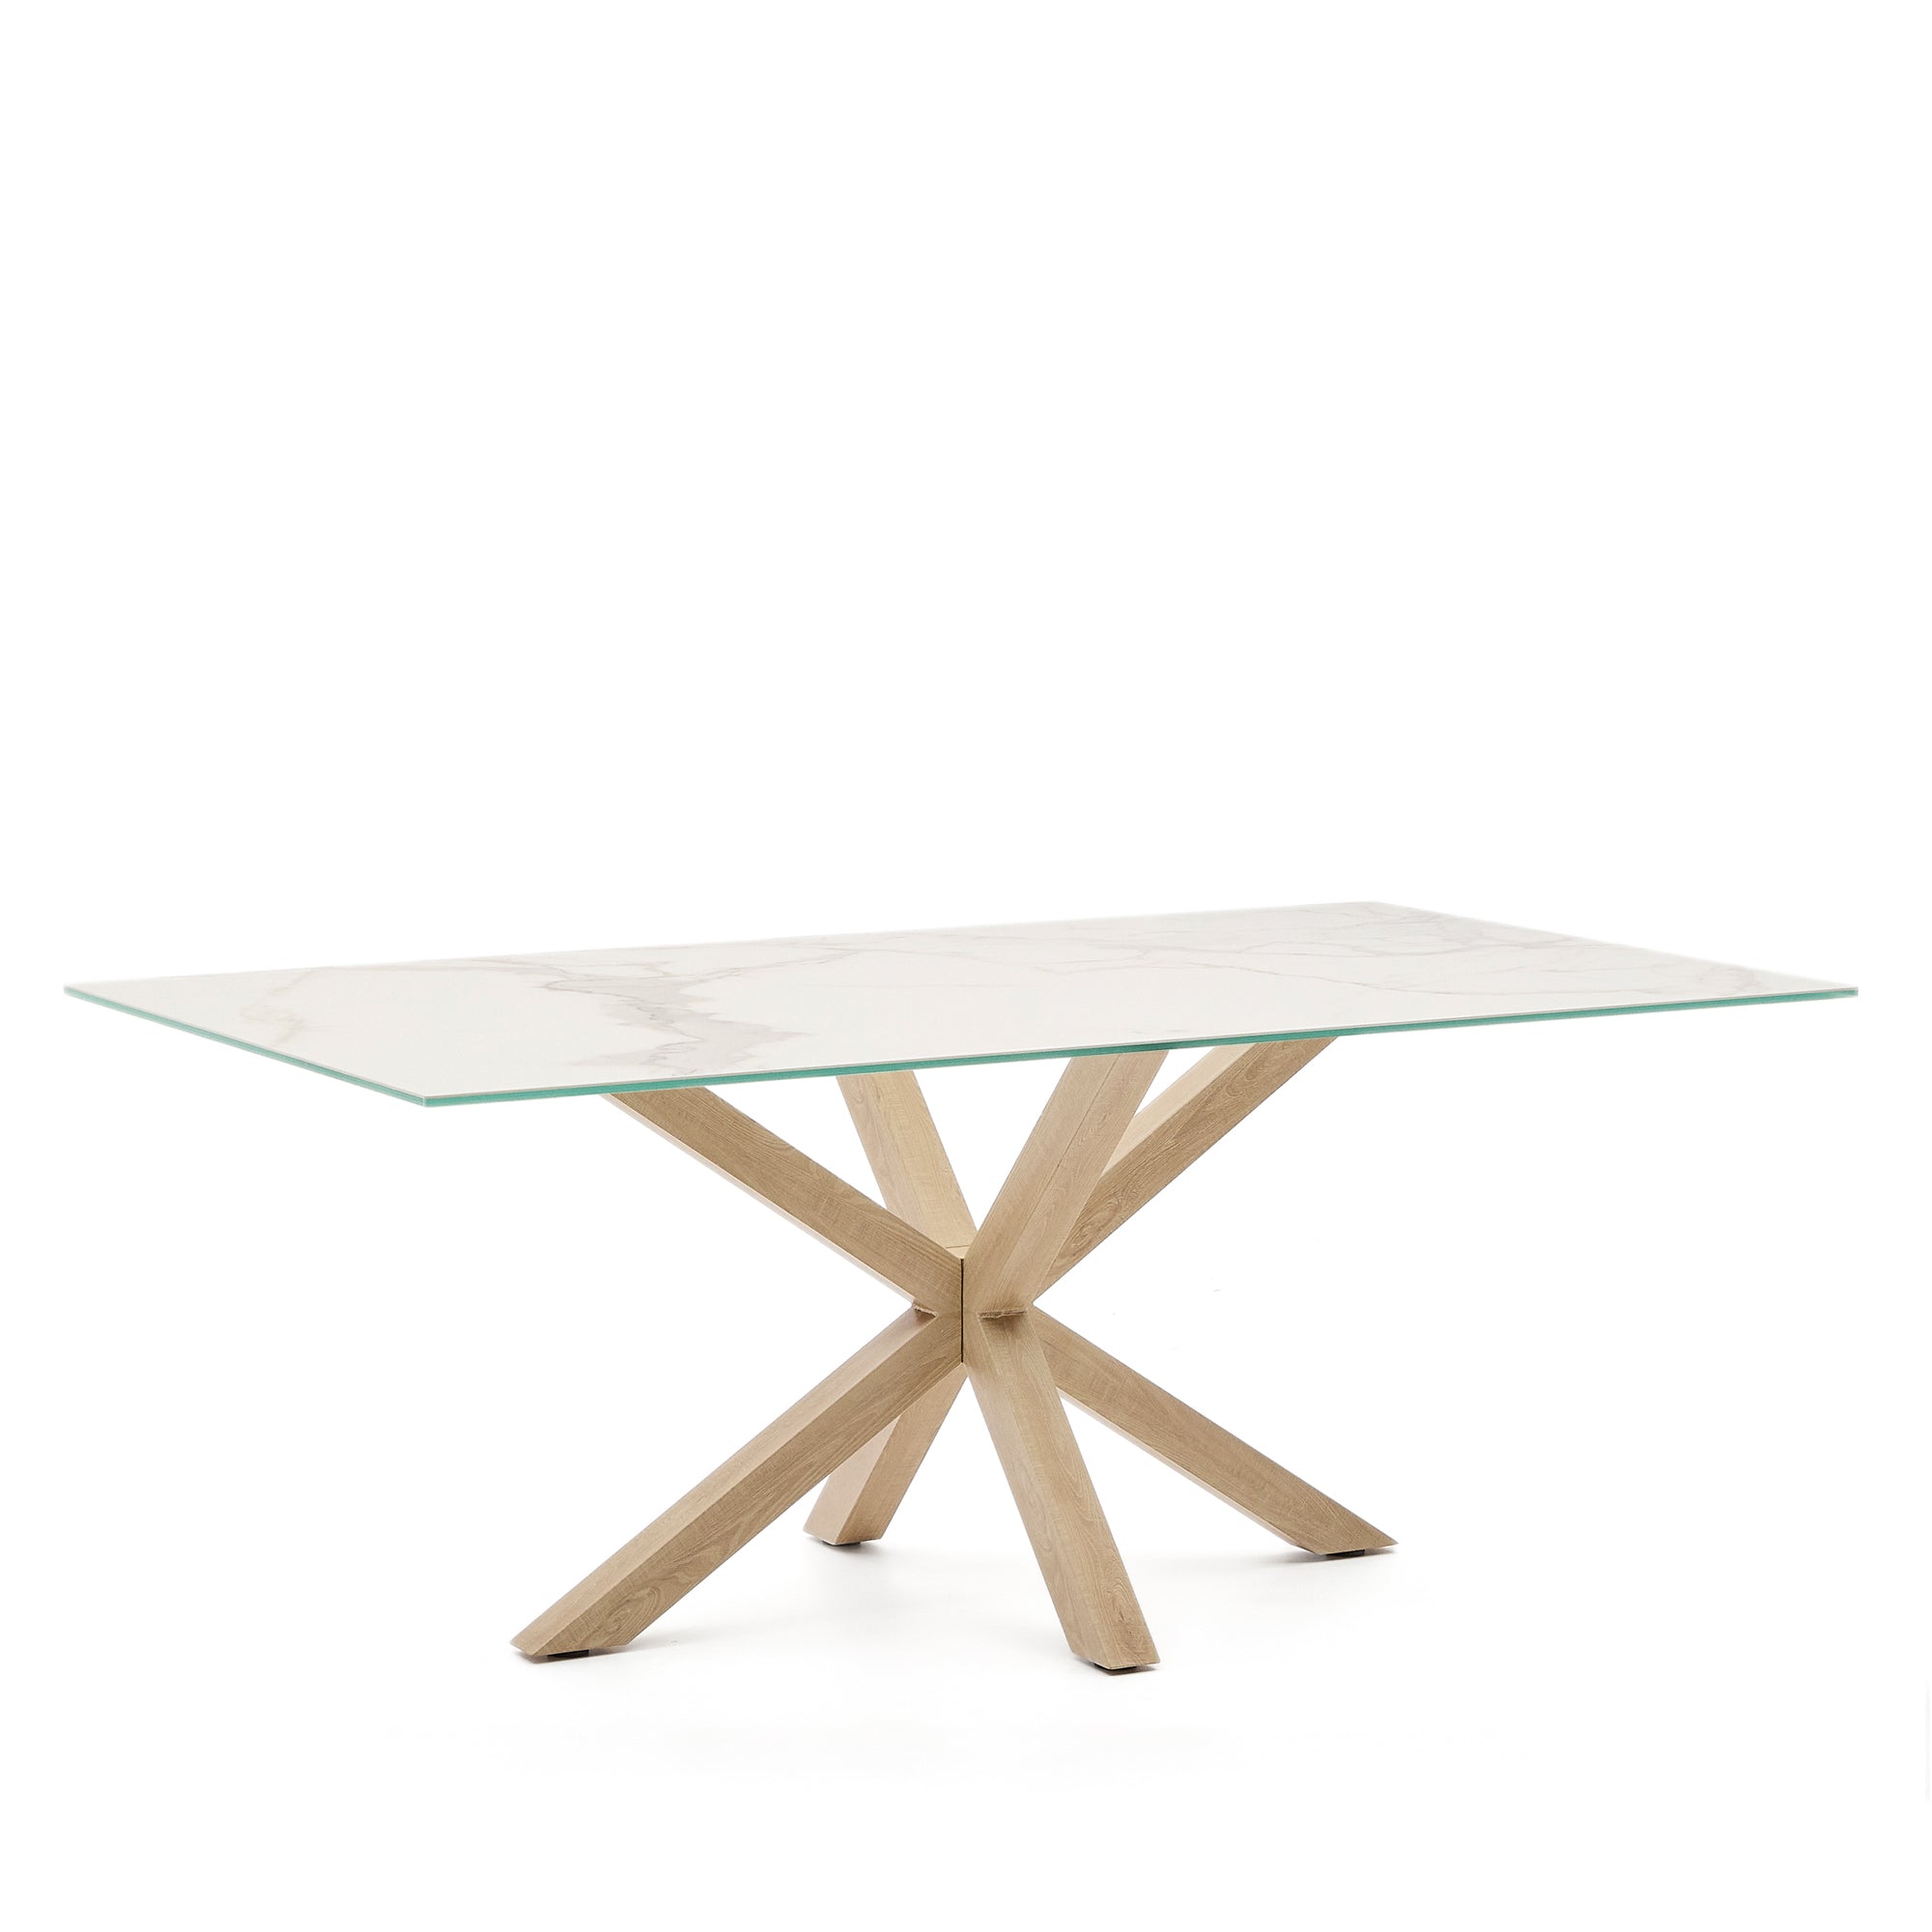 Argo porcelain table in white with steel wood effect legs 200 x 100 cm